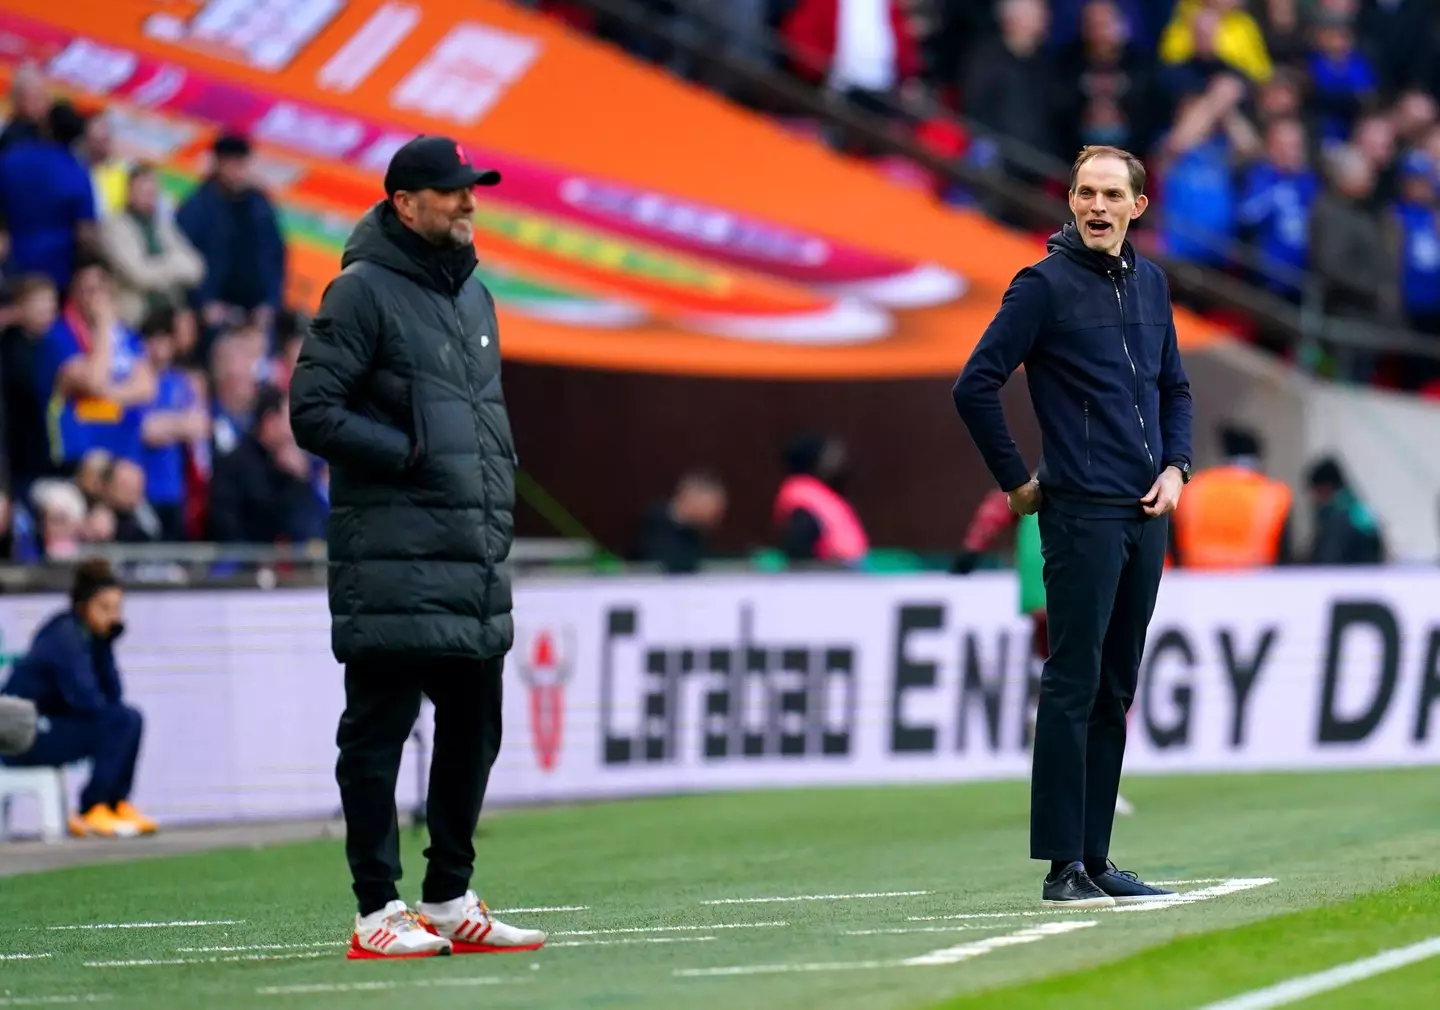 Chelsea manager Thomas Tuchel (right) and Liverpool manager Jurgen Klopp during the Carabao Cup final at Wembley Stadium, London. (Alamy)